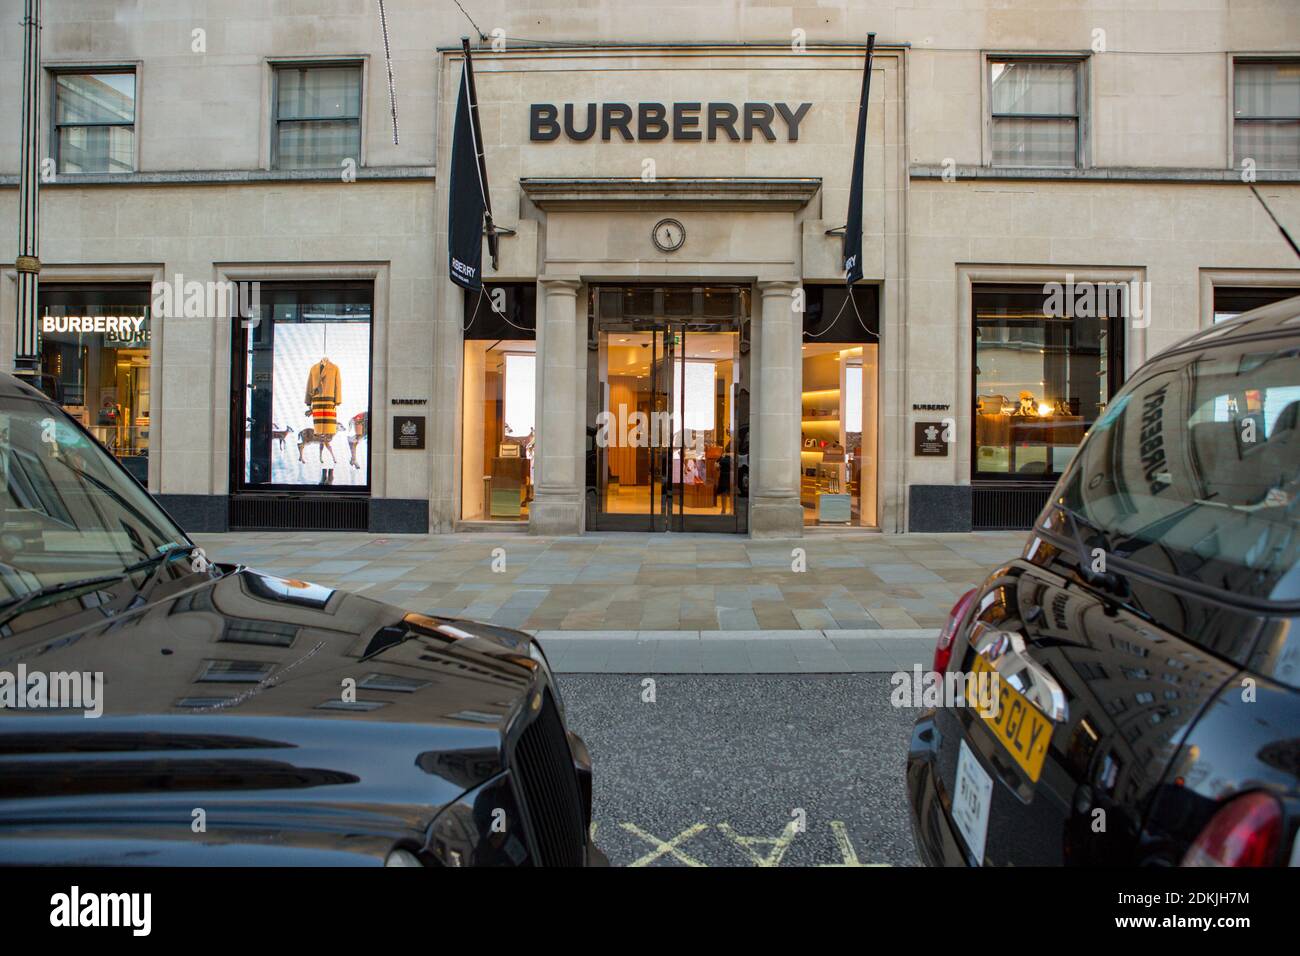 London, UK. 15th Dec, 2020. London Taxis aka Cabs seen outside the Burberry Store in New Bon Street, Mayfair. Credit: Pietro Recchia/SOPA Images/ZUMA Wire/Alamy Live News Stock Photo - Alamy